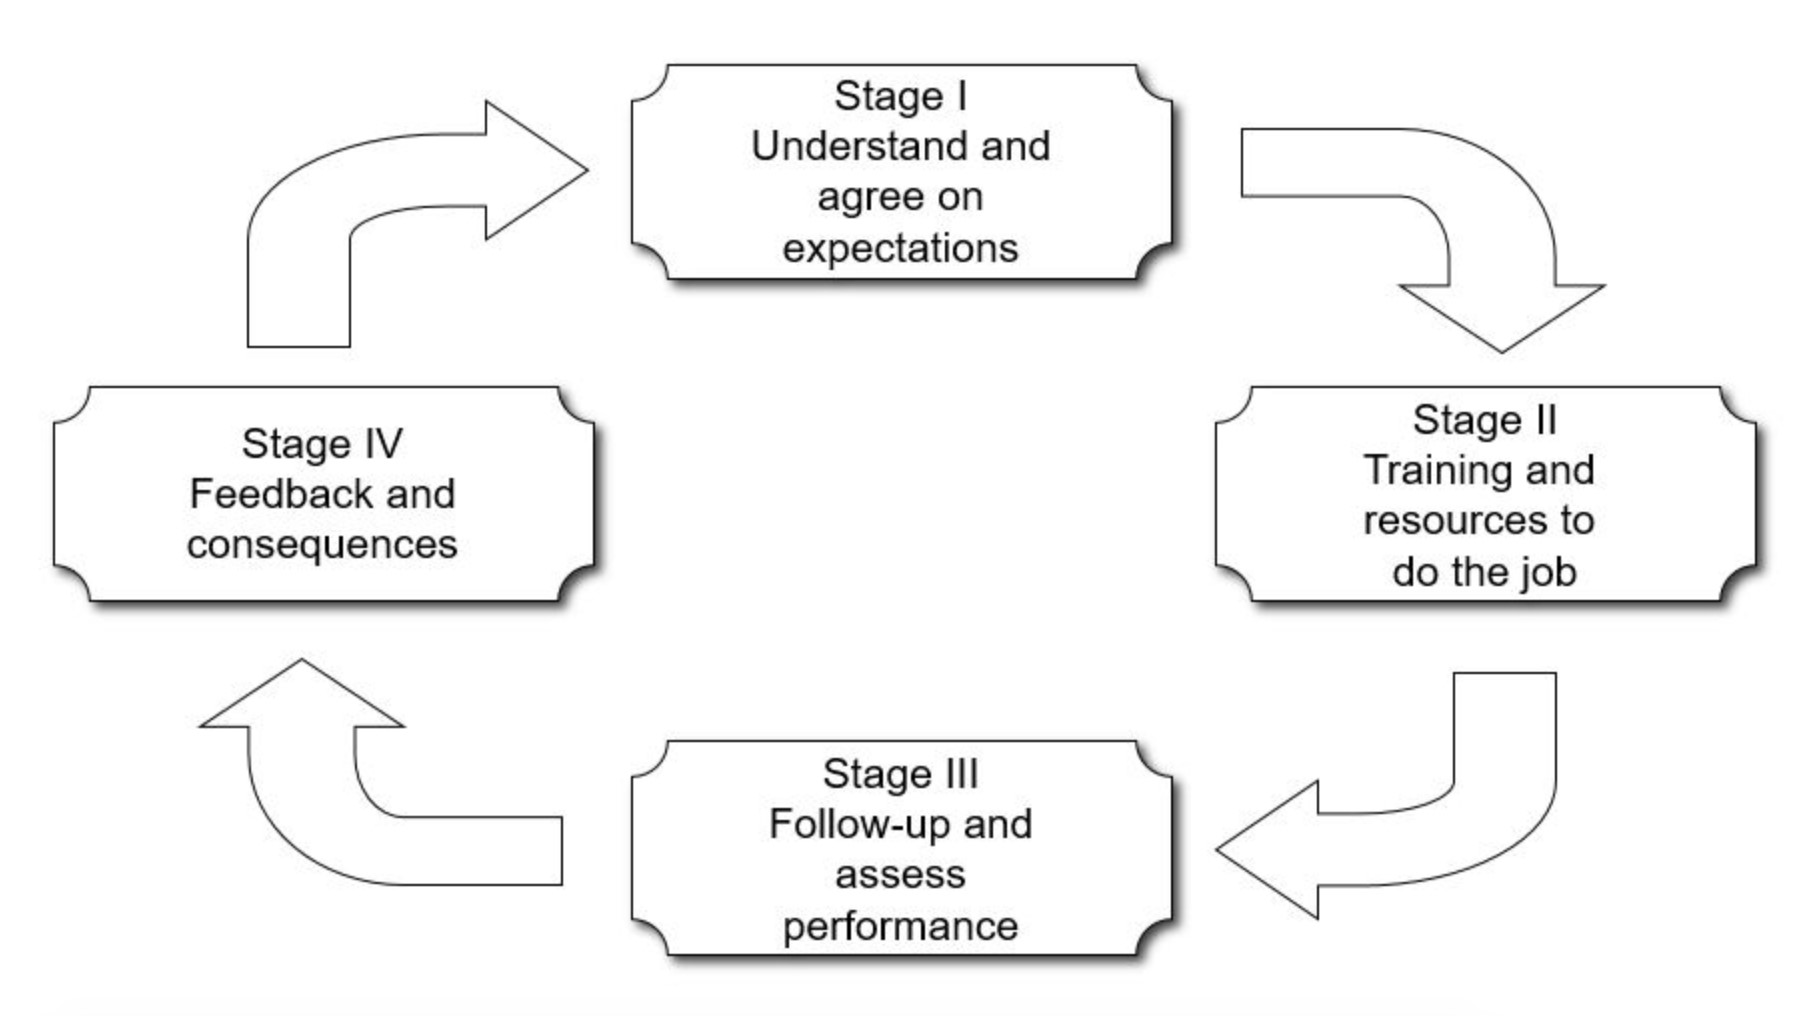 Stage 1: Understand and agree on expectations. Stage 2: Training and resources to do the job. Stage 3: Follow-up and assess performance. Stage 4: Feedback and consequences.